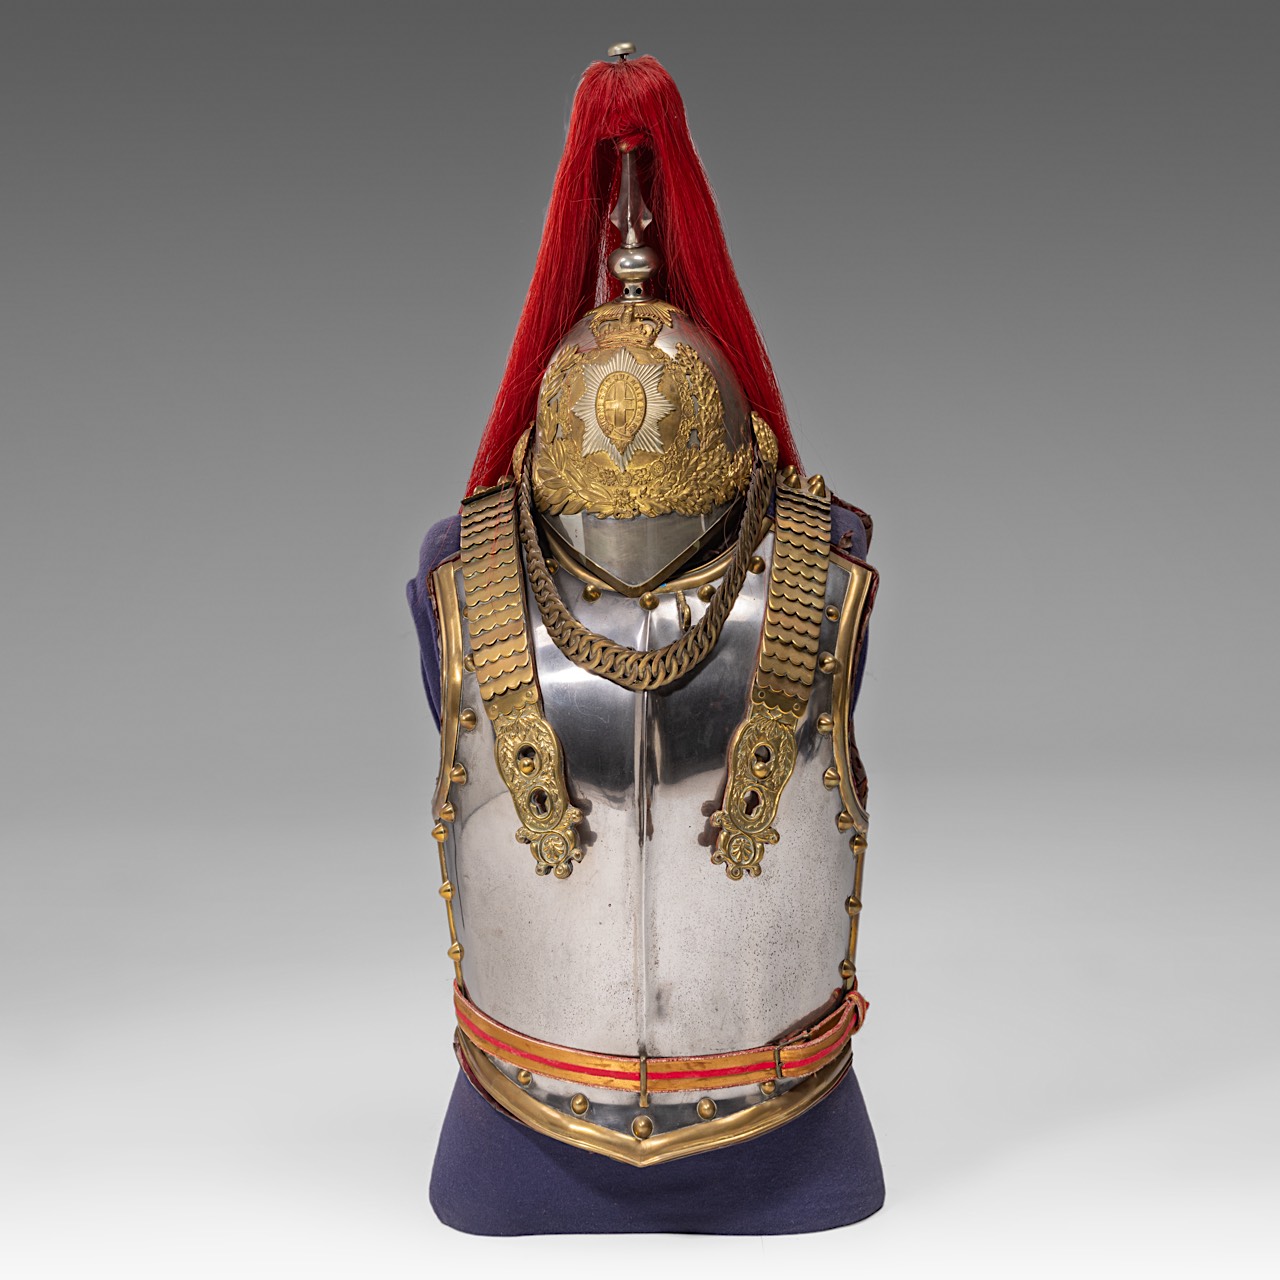 Cuirass and helmet of the Royal Horse Guards, metal and brass, 1928 83 x 34 x 42 cm. (32.6 x 13.3 x